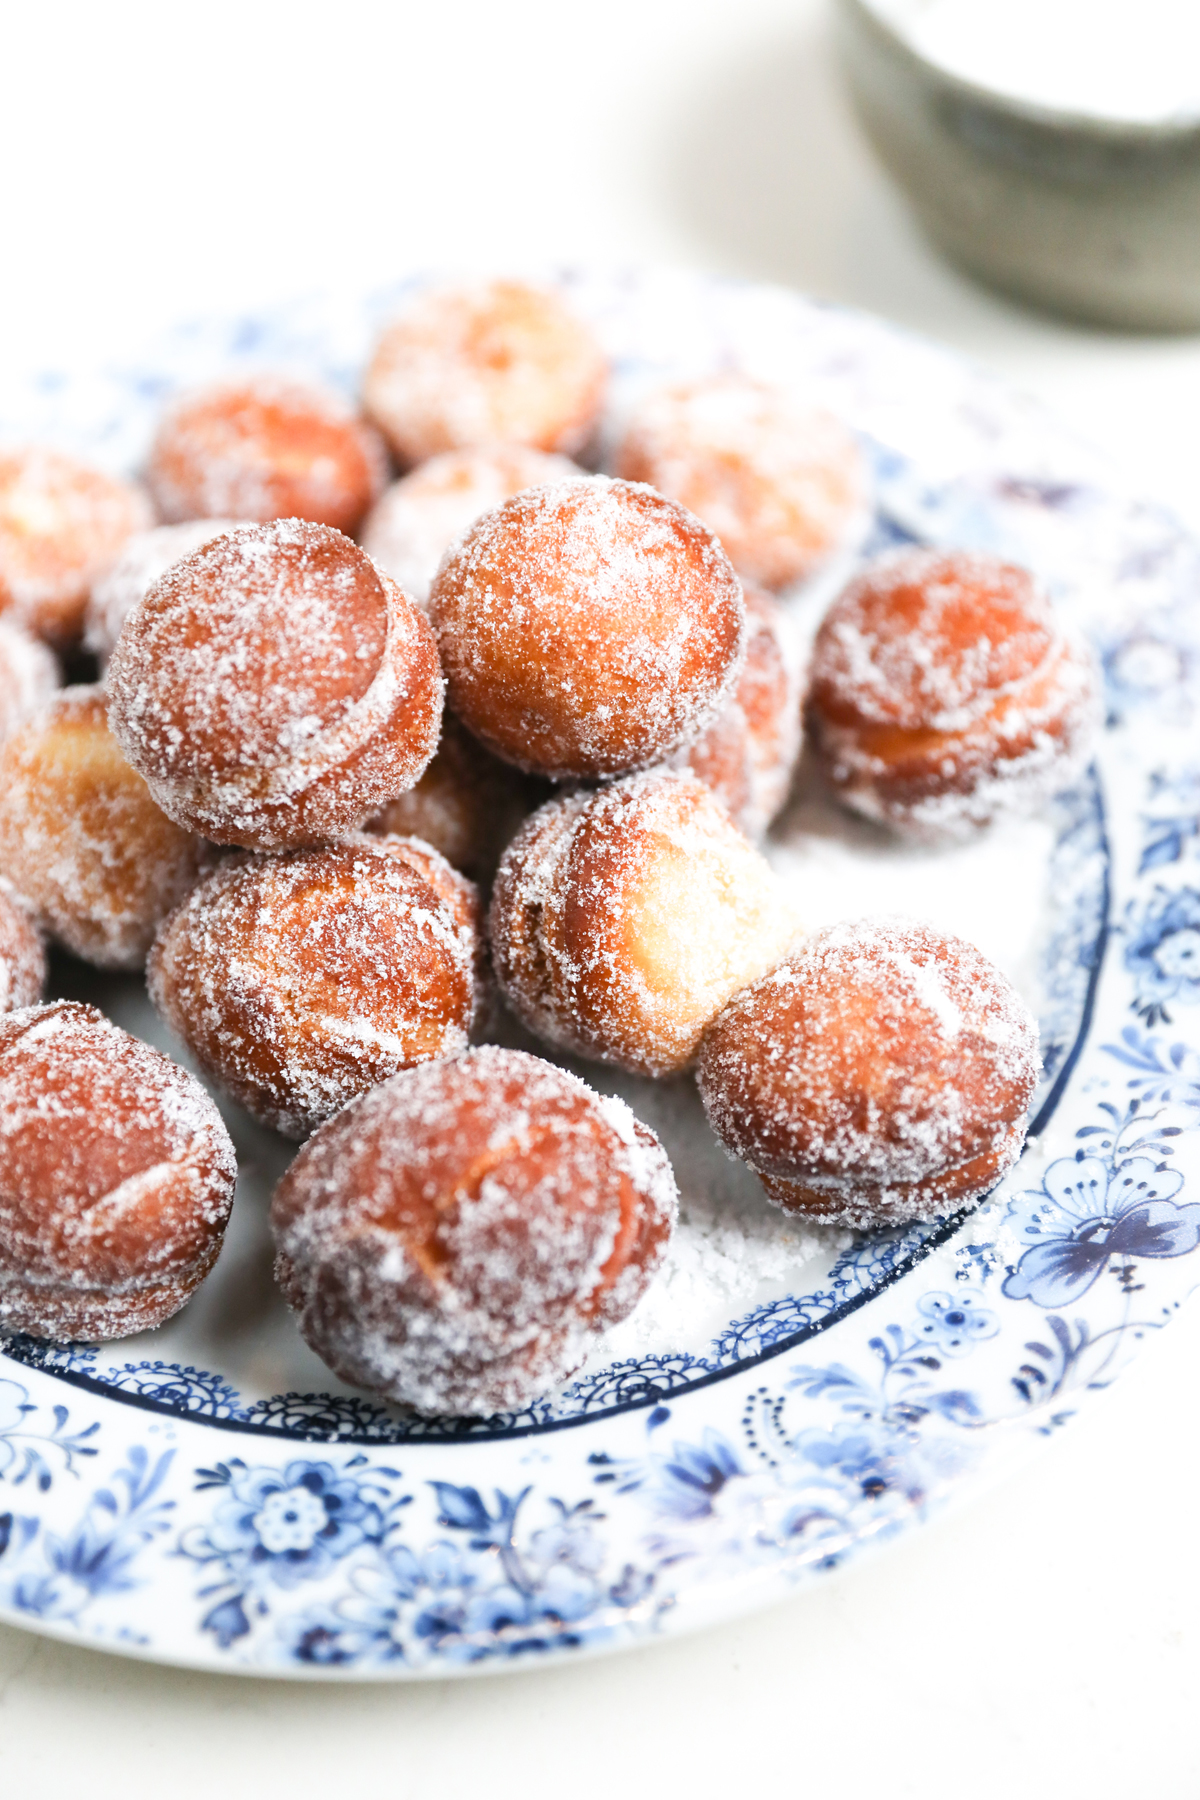 Doughnuts dusted in caster sugar up close